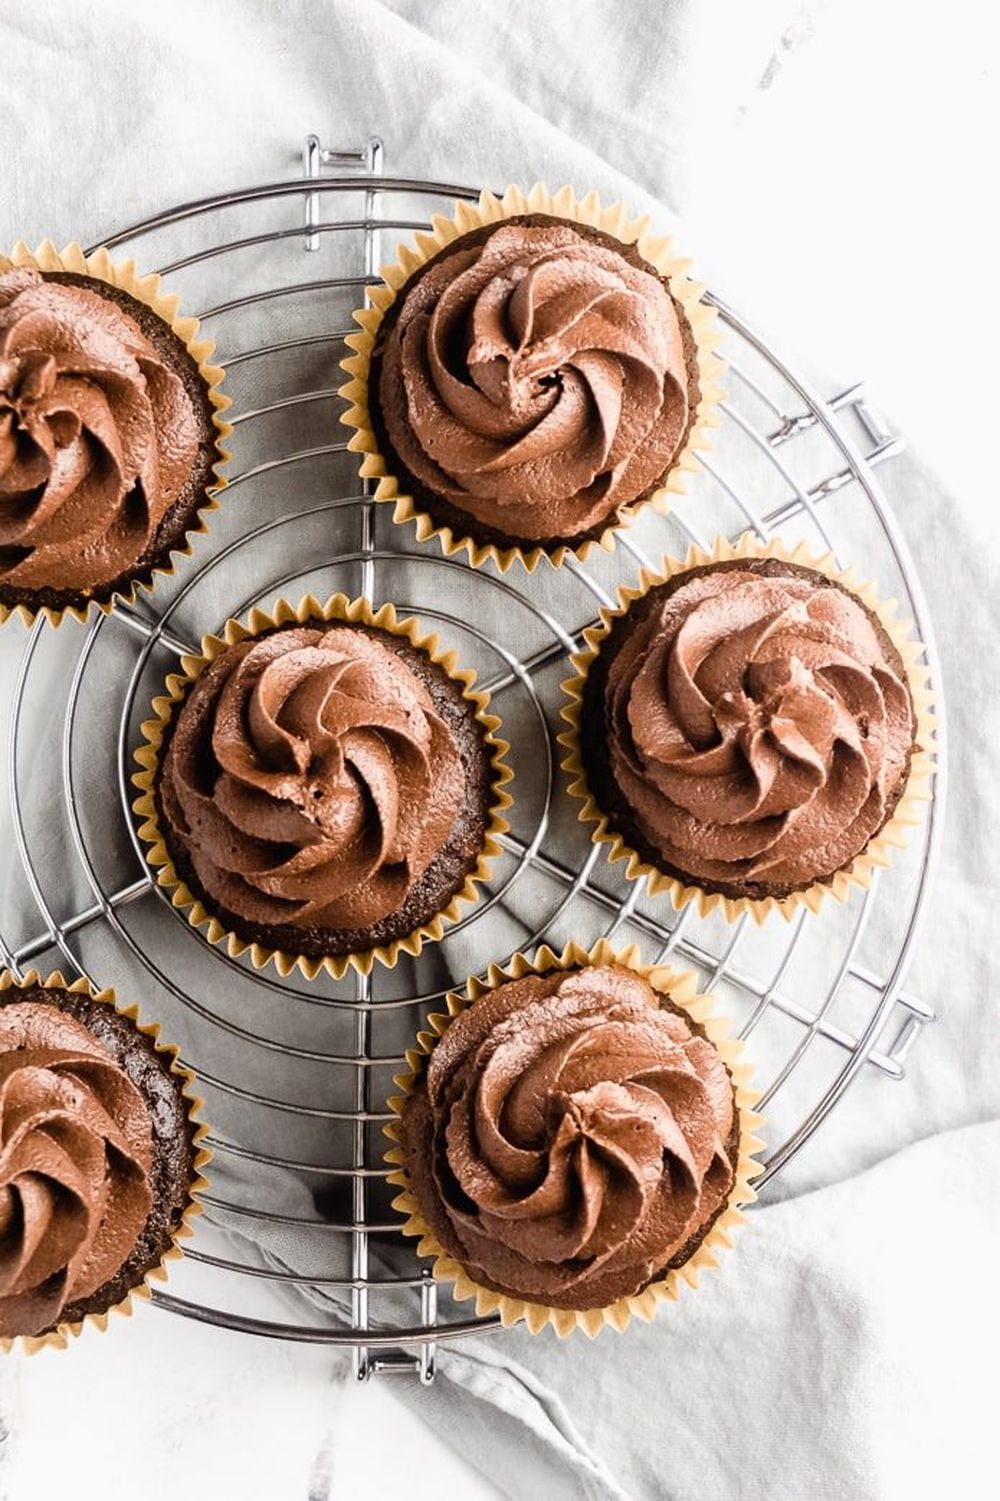 Best valentine's day cupcakes  keto chocolate cupcakes with buttercream frosting